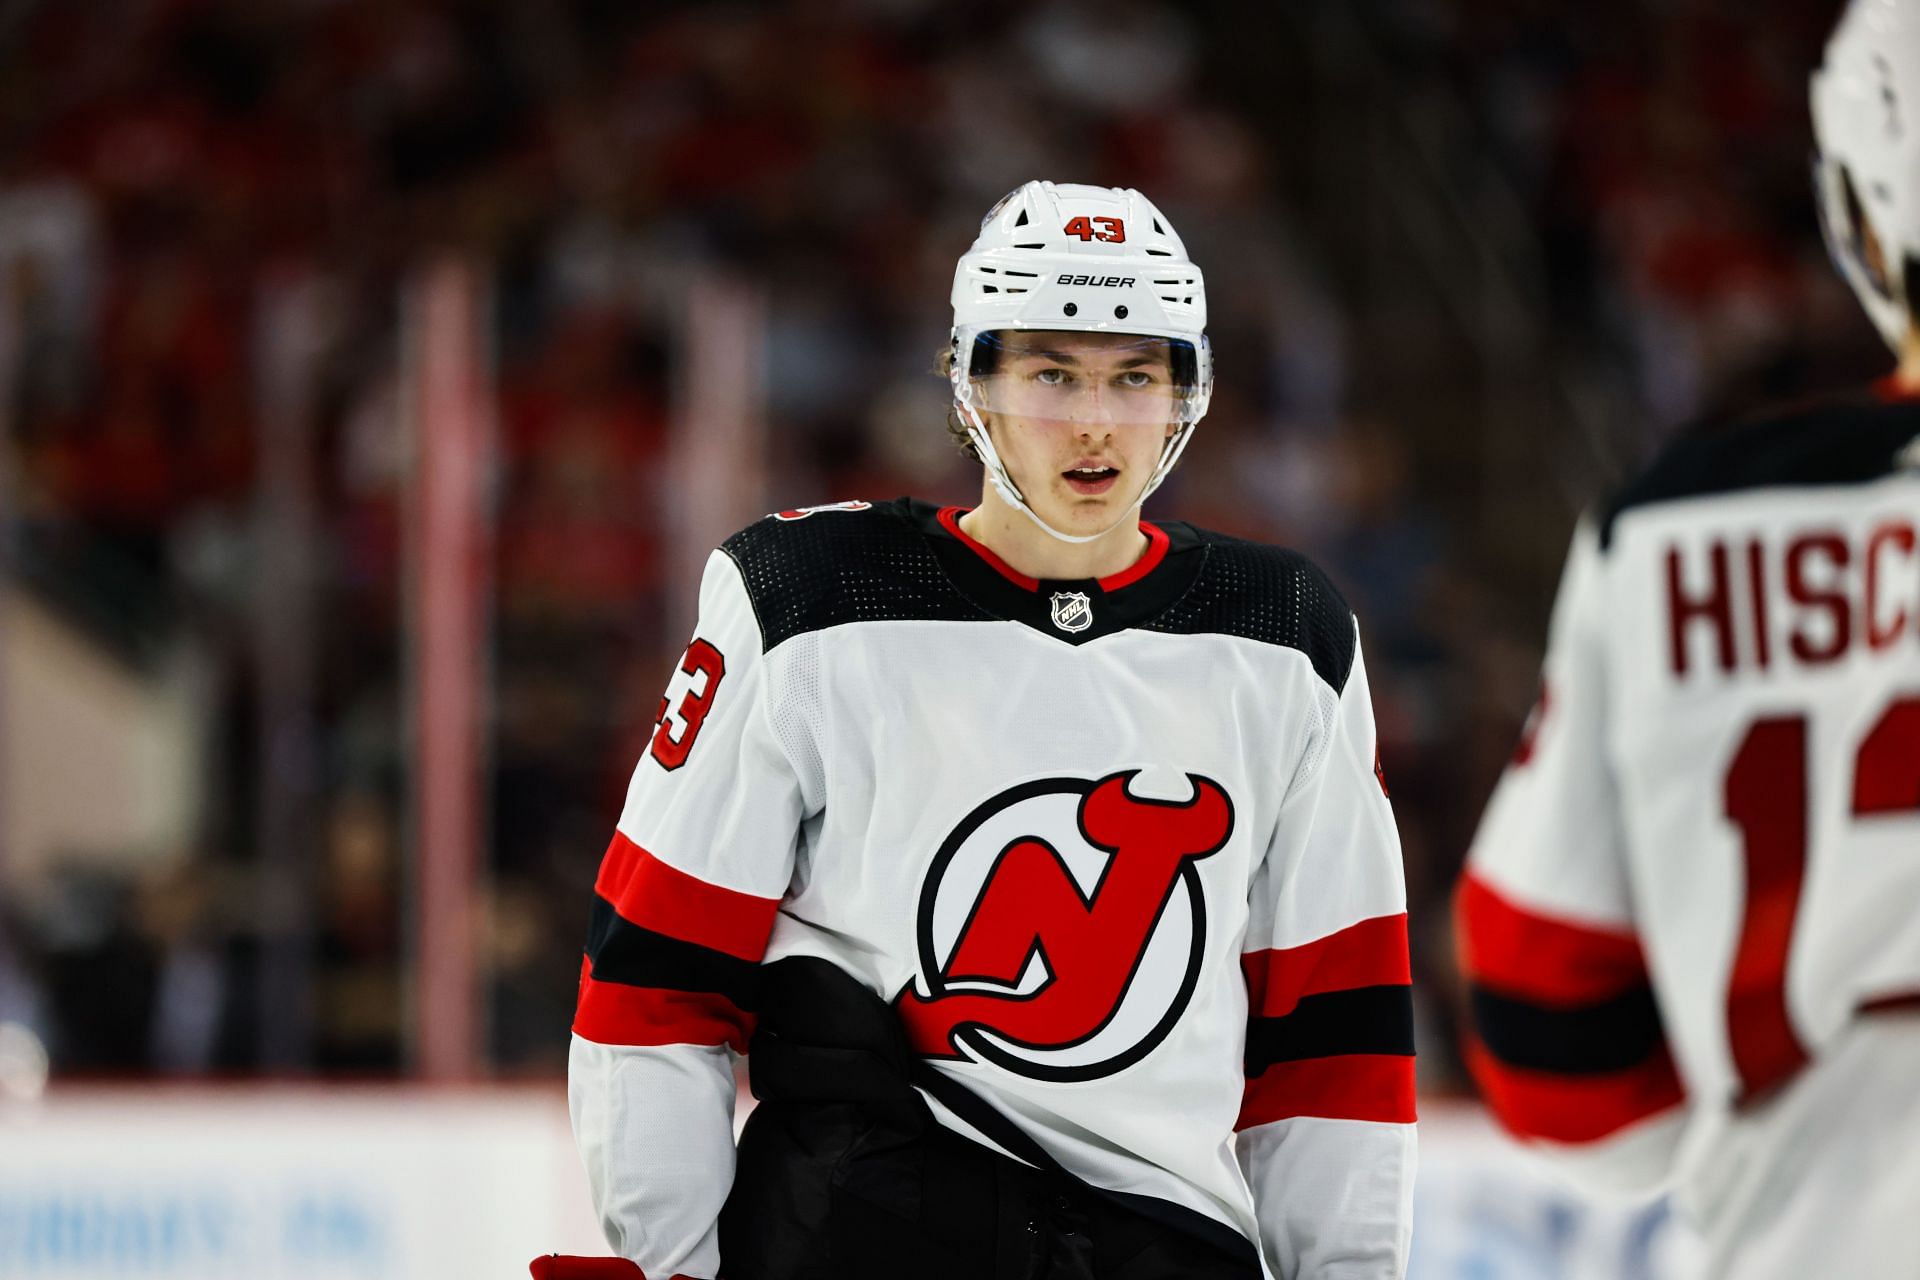 Devils sign defenceman Luke Hughes to three-year, entry-level contract